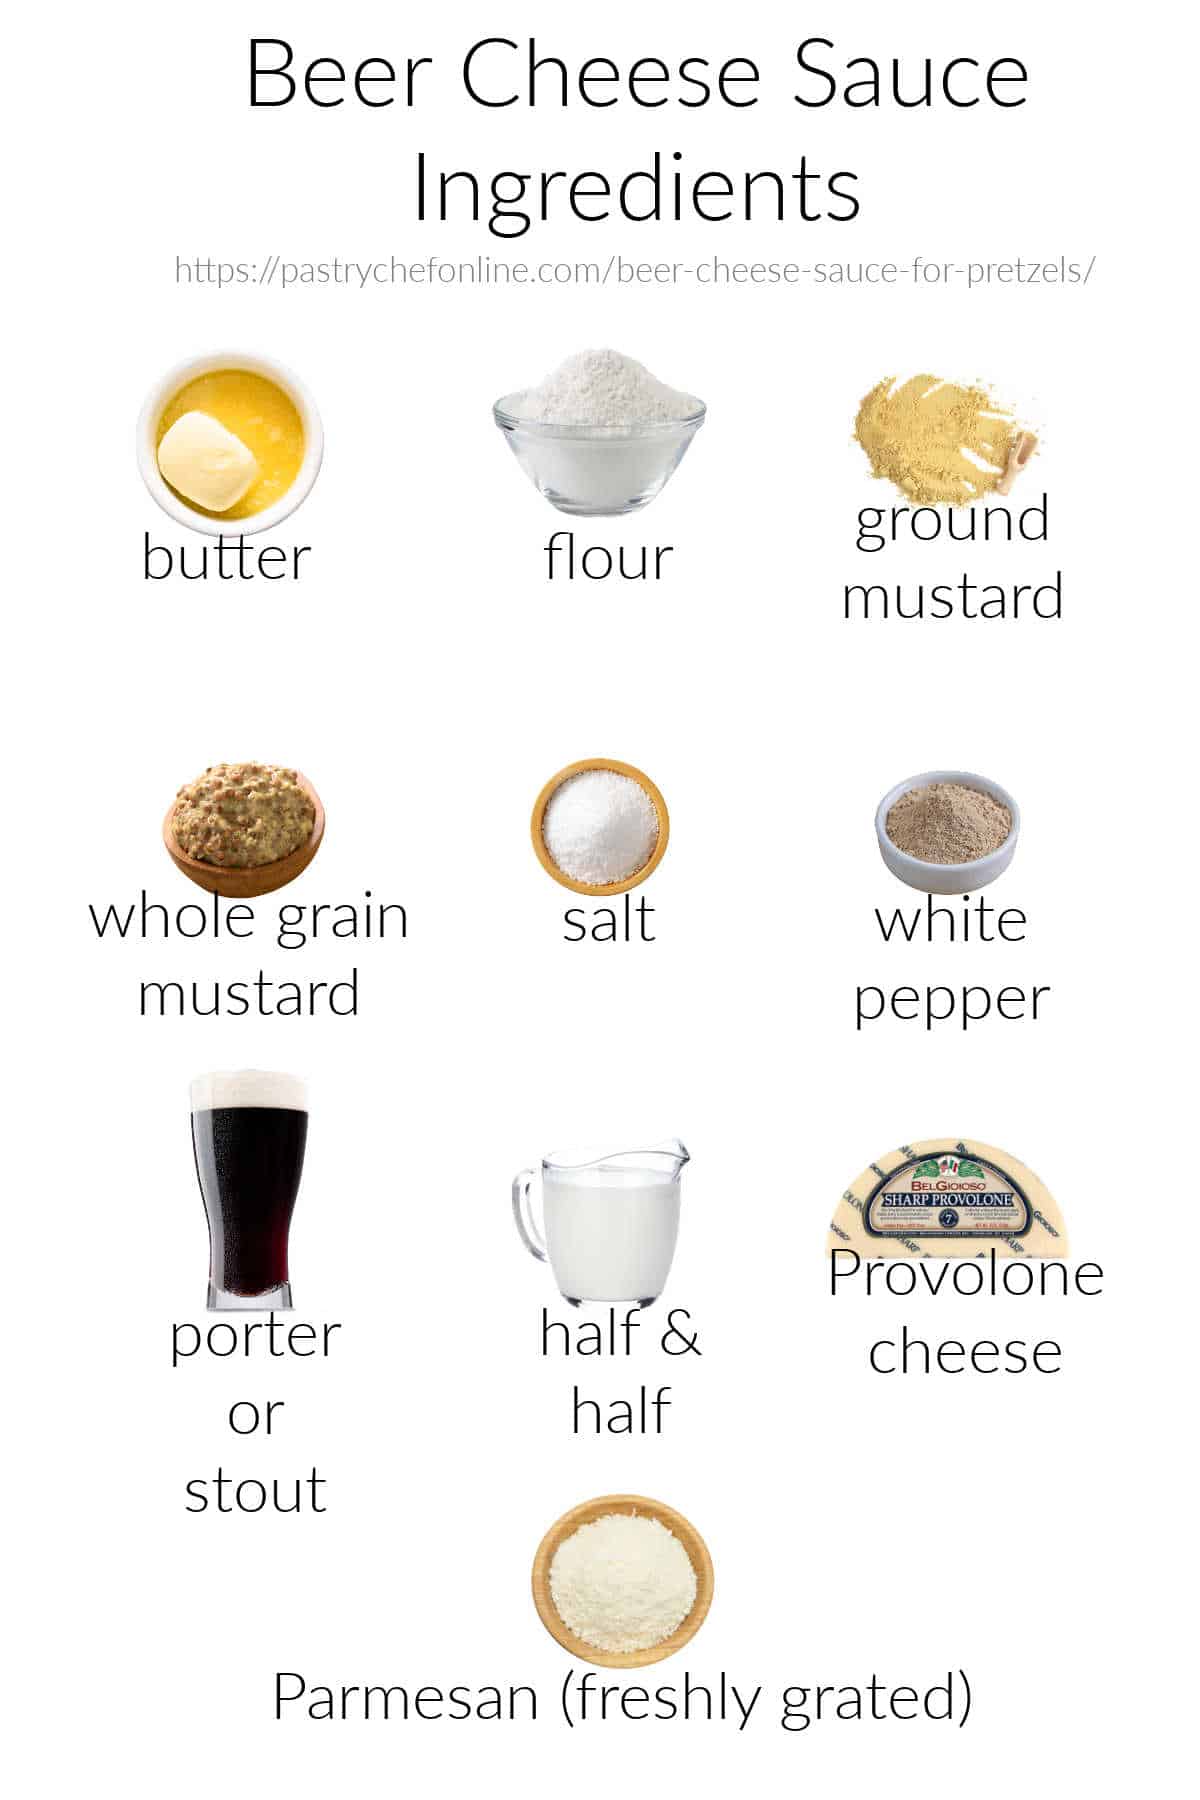 All the ingredients needed to make a roux-based beer cheese sauce, labeled and on a white background.